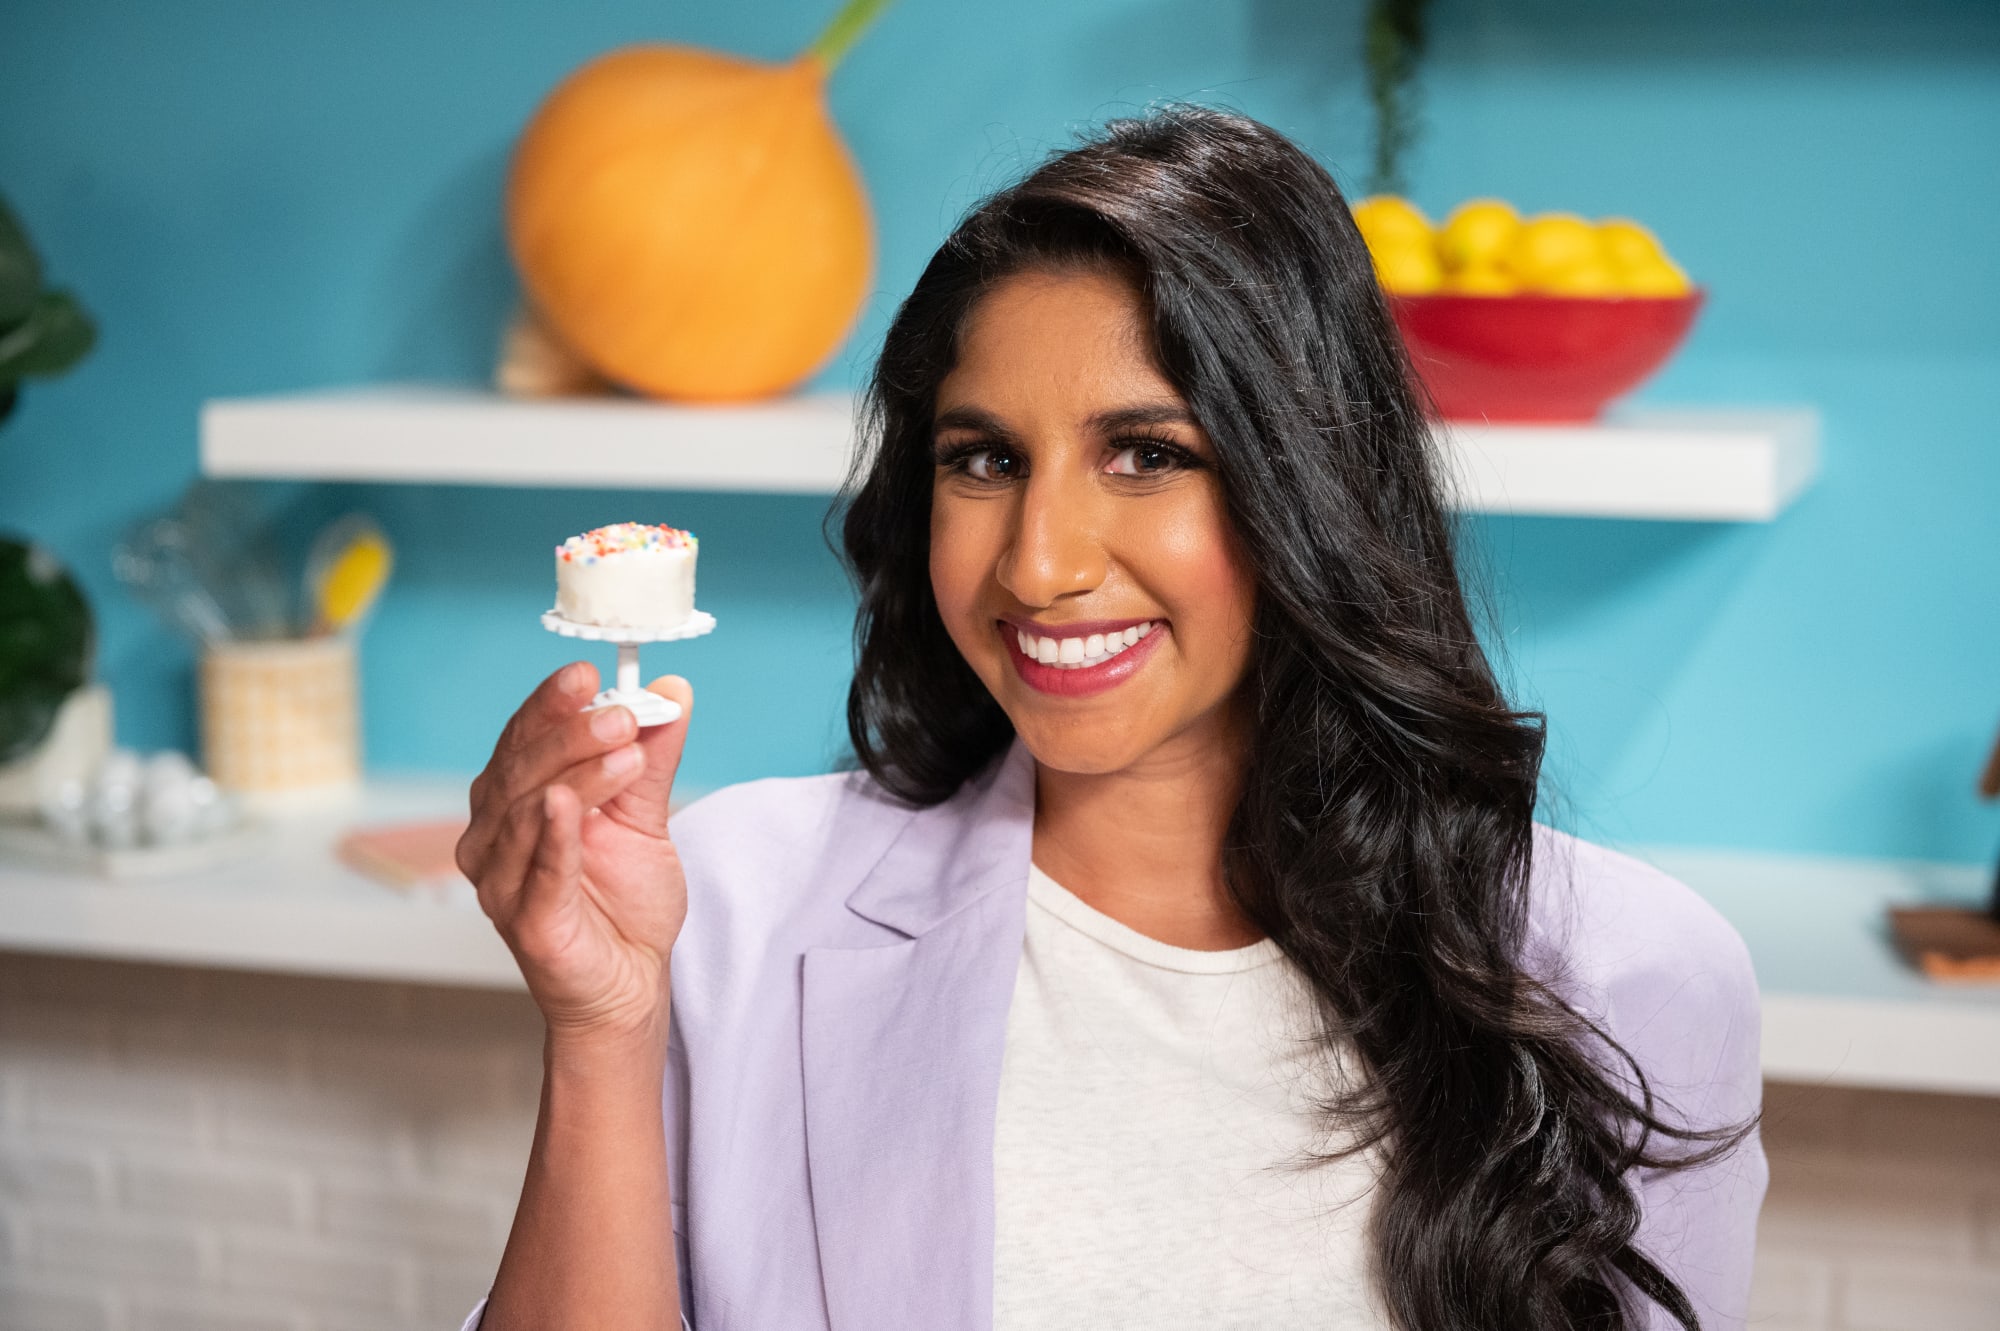 Tiny Kitchen Cook-Off set to make its debut on Tastemade